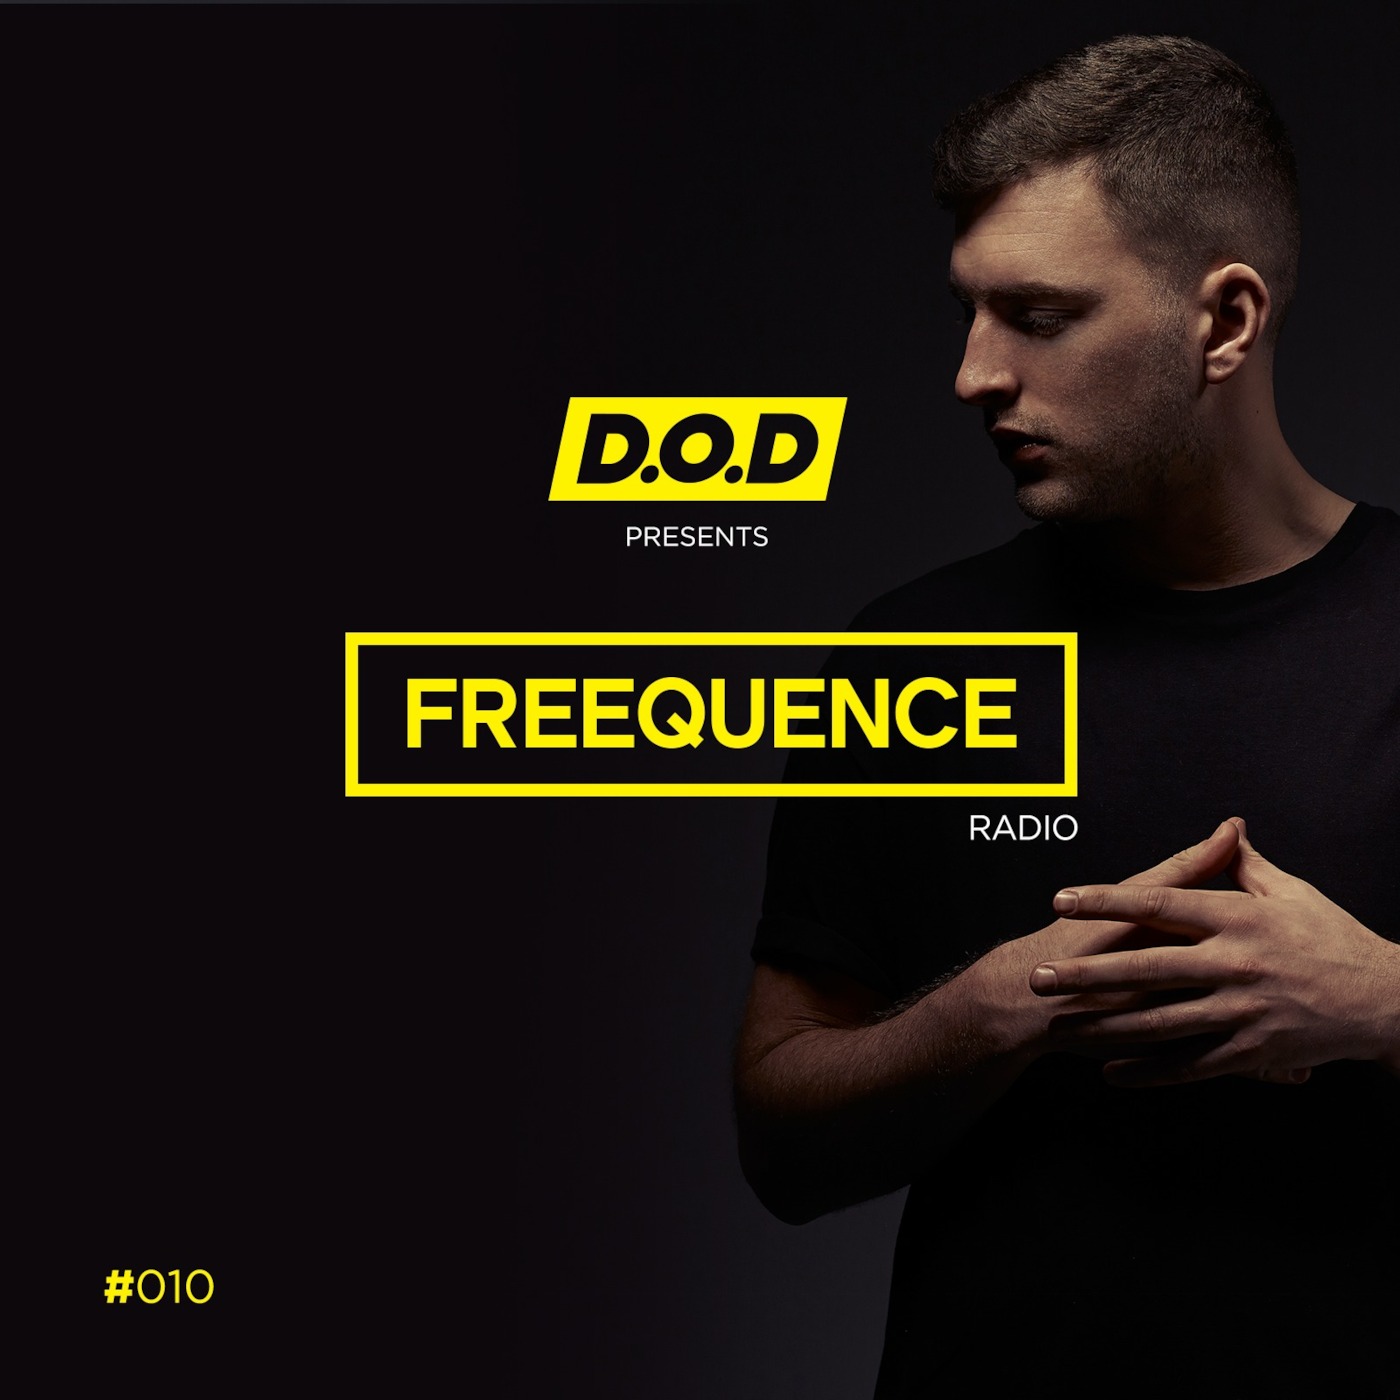 #FREEQUENCE Radio with D.O.D #010